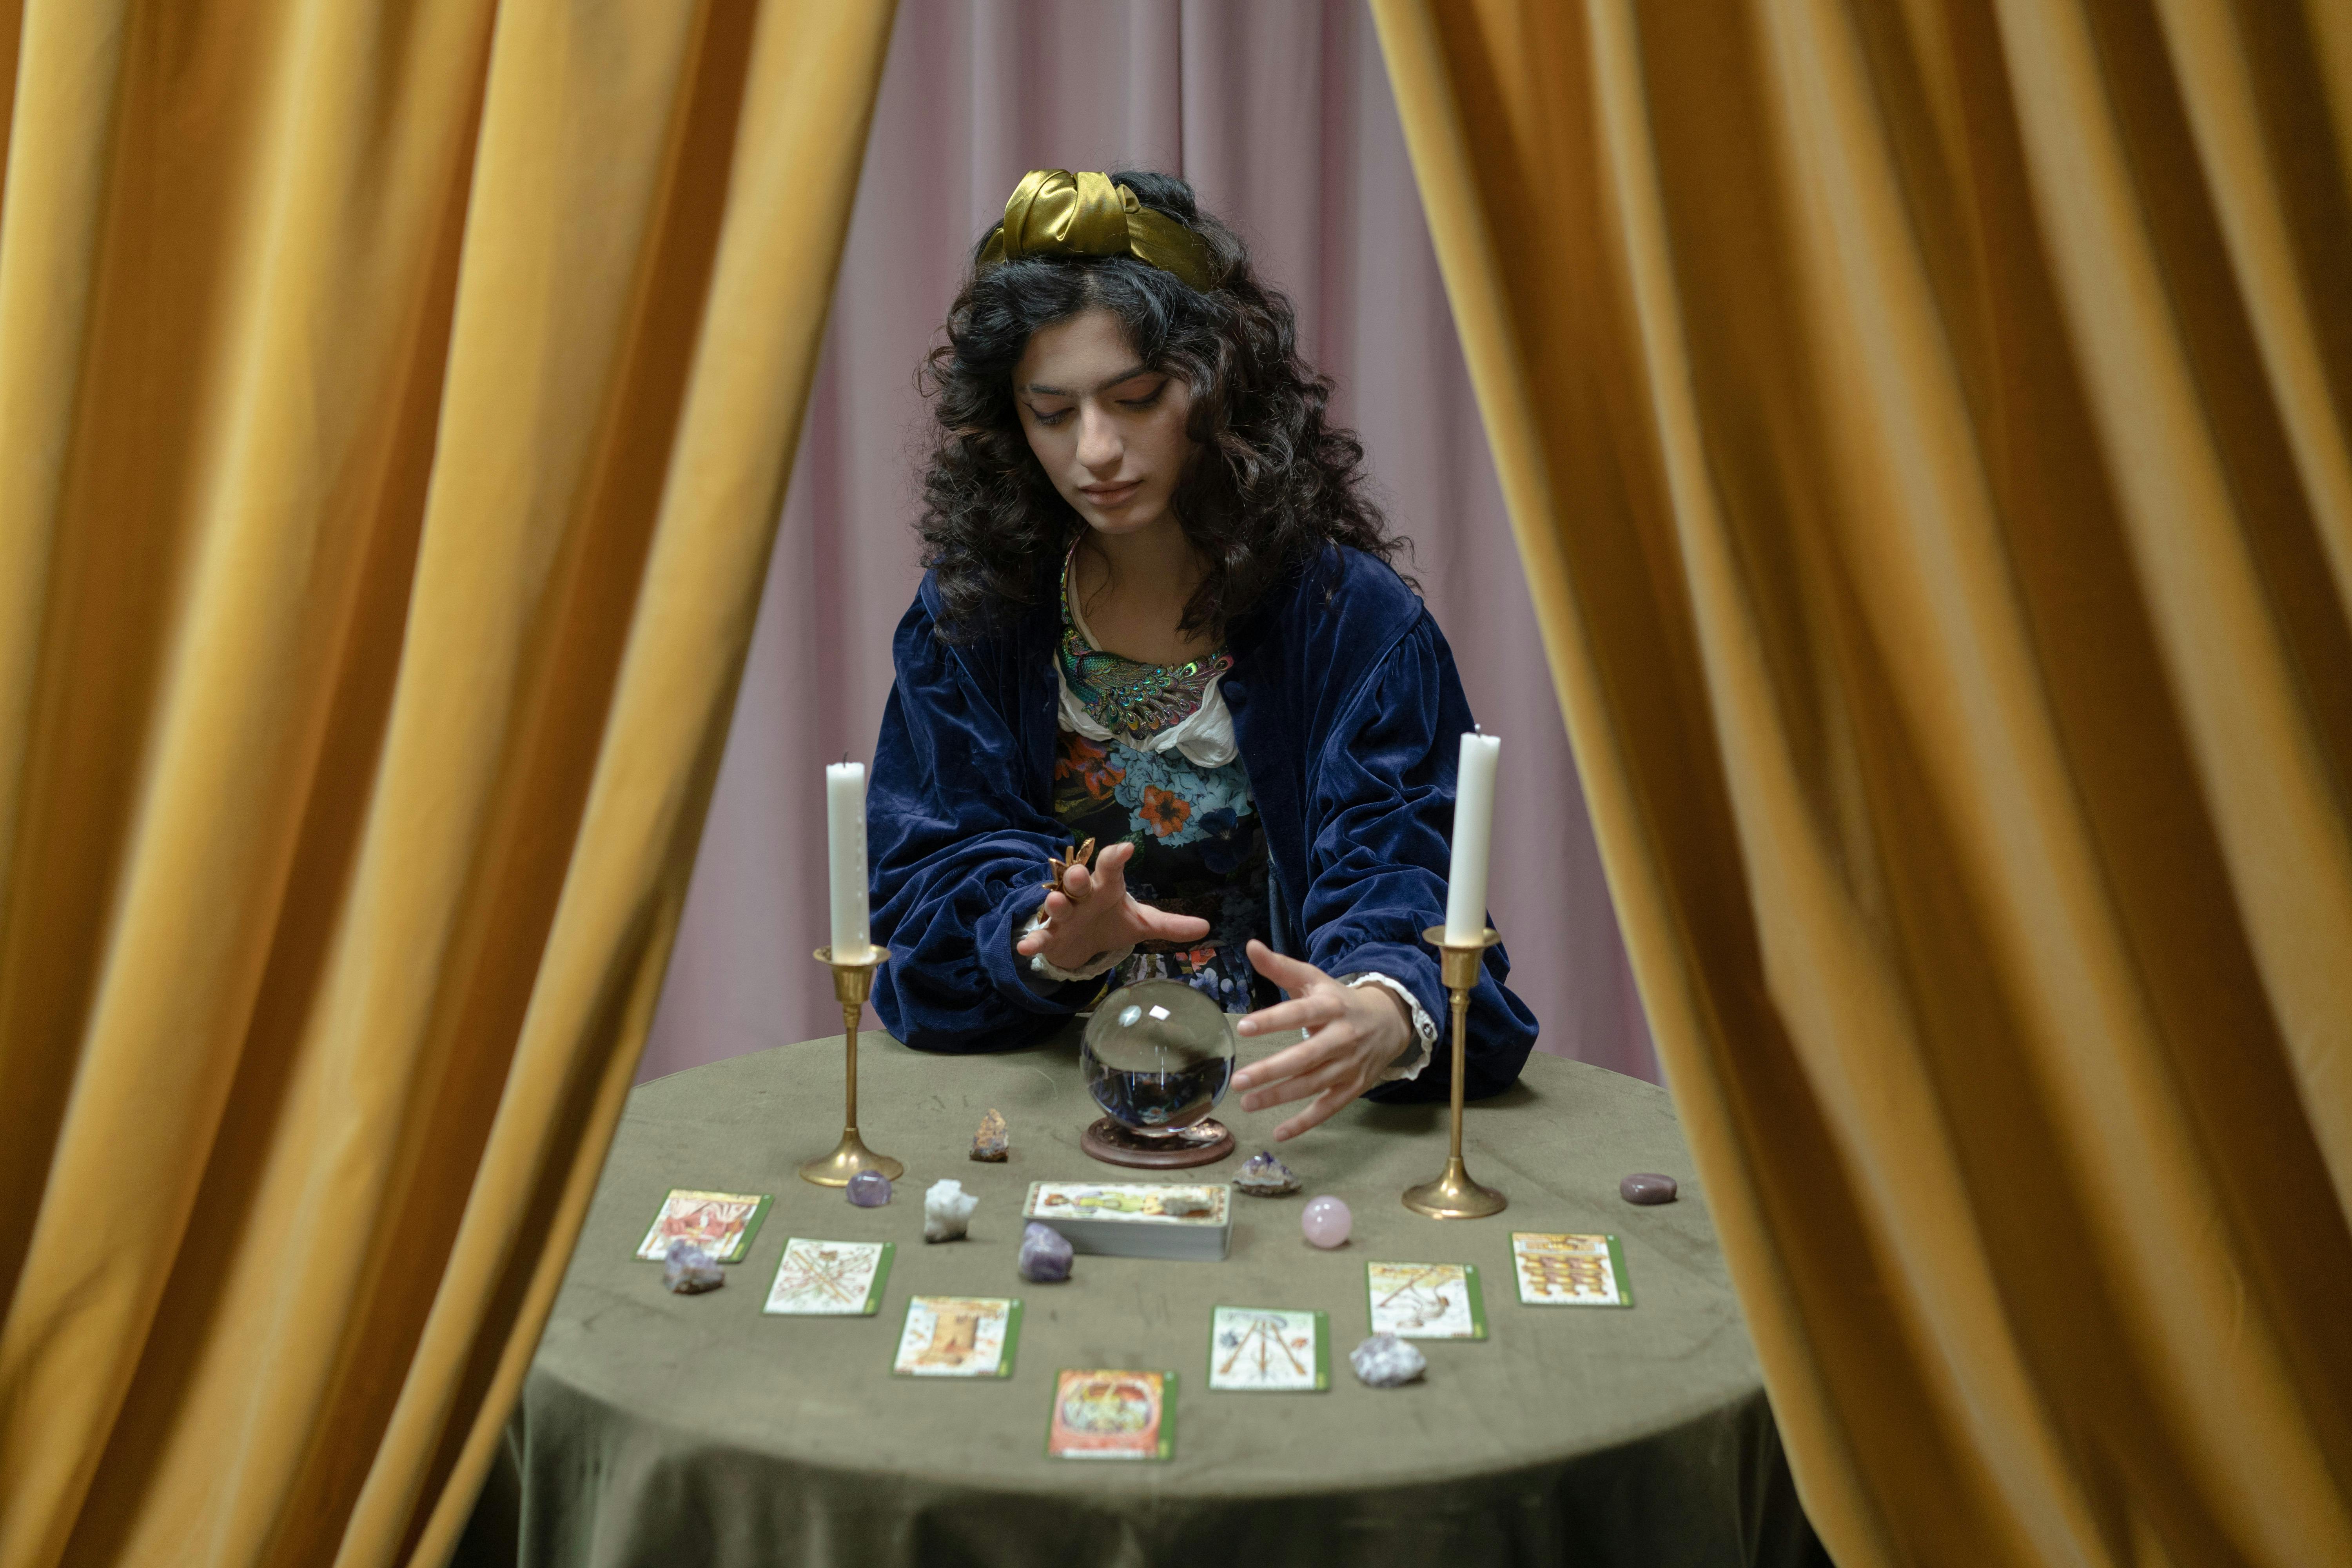 A fortune teller sitting in front of her crystal ball and tarot cards | Source: Pexels